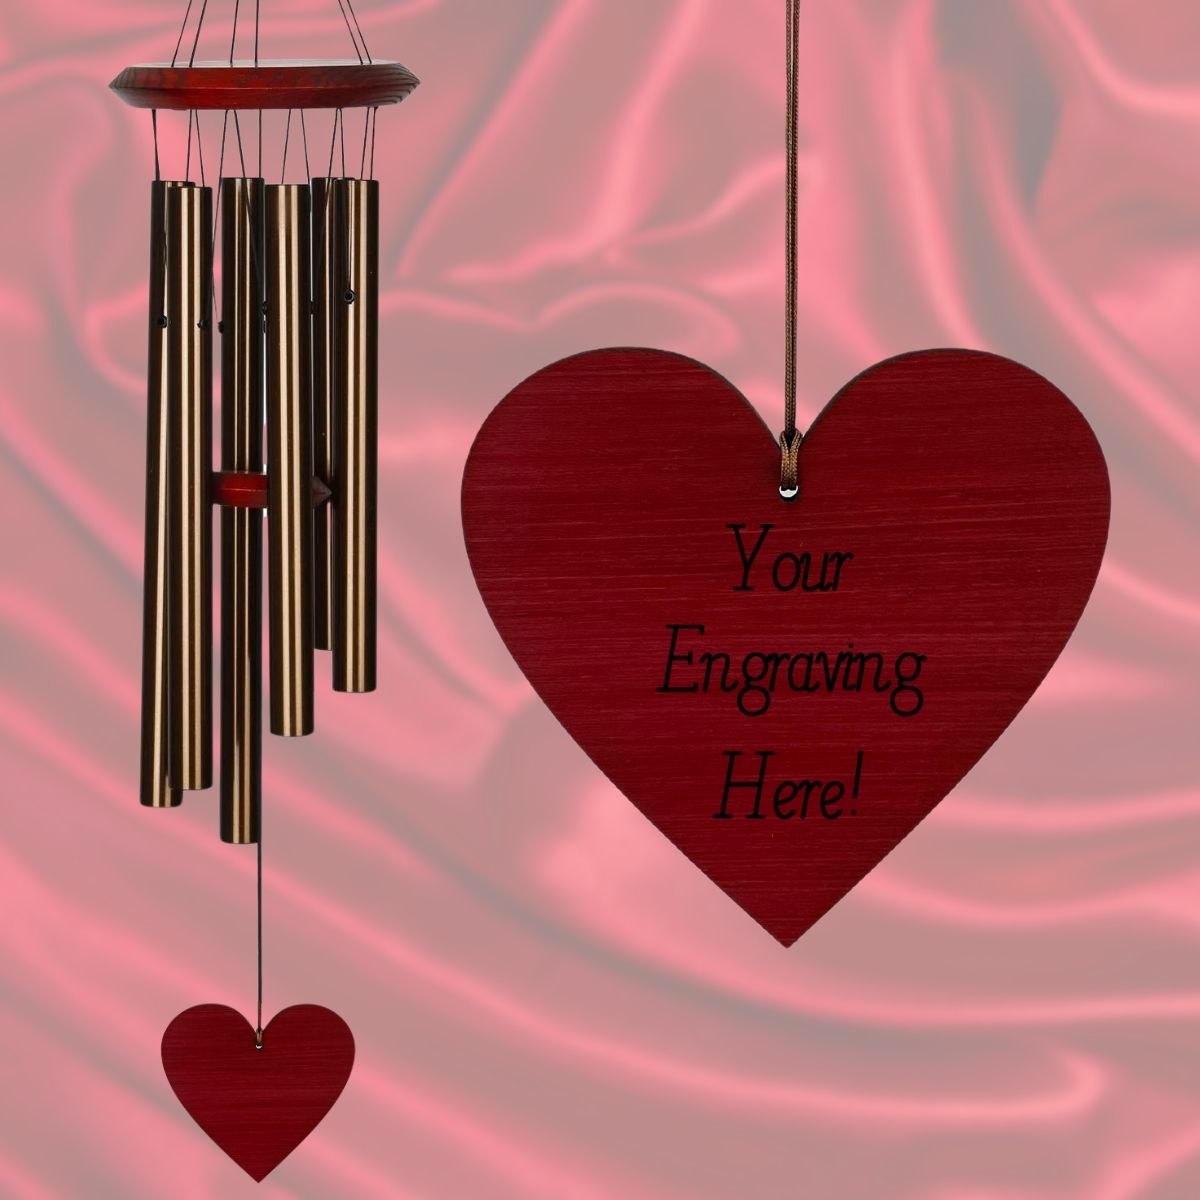 27 Inch Chimes of Pluto Wind Chime - Bronze - Heart